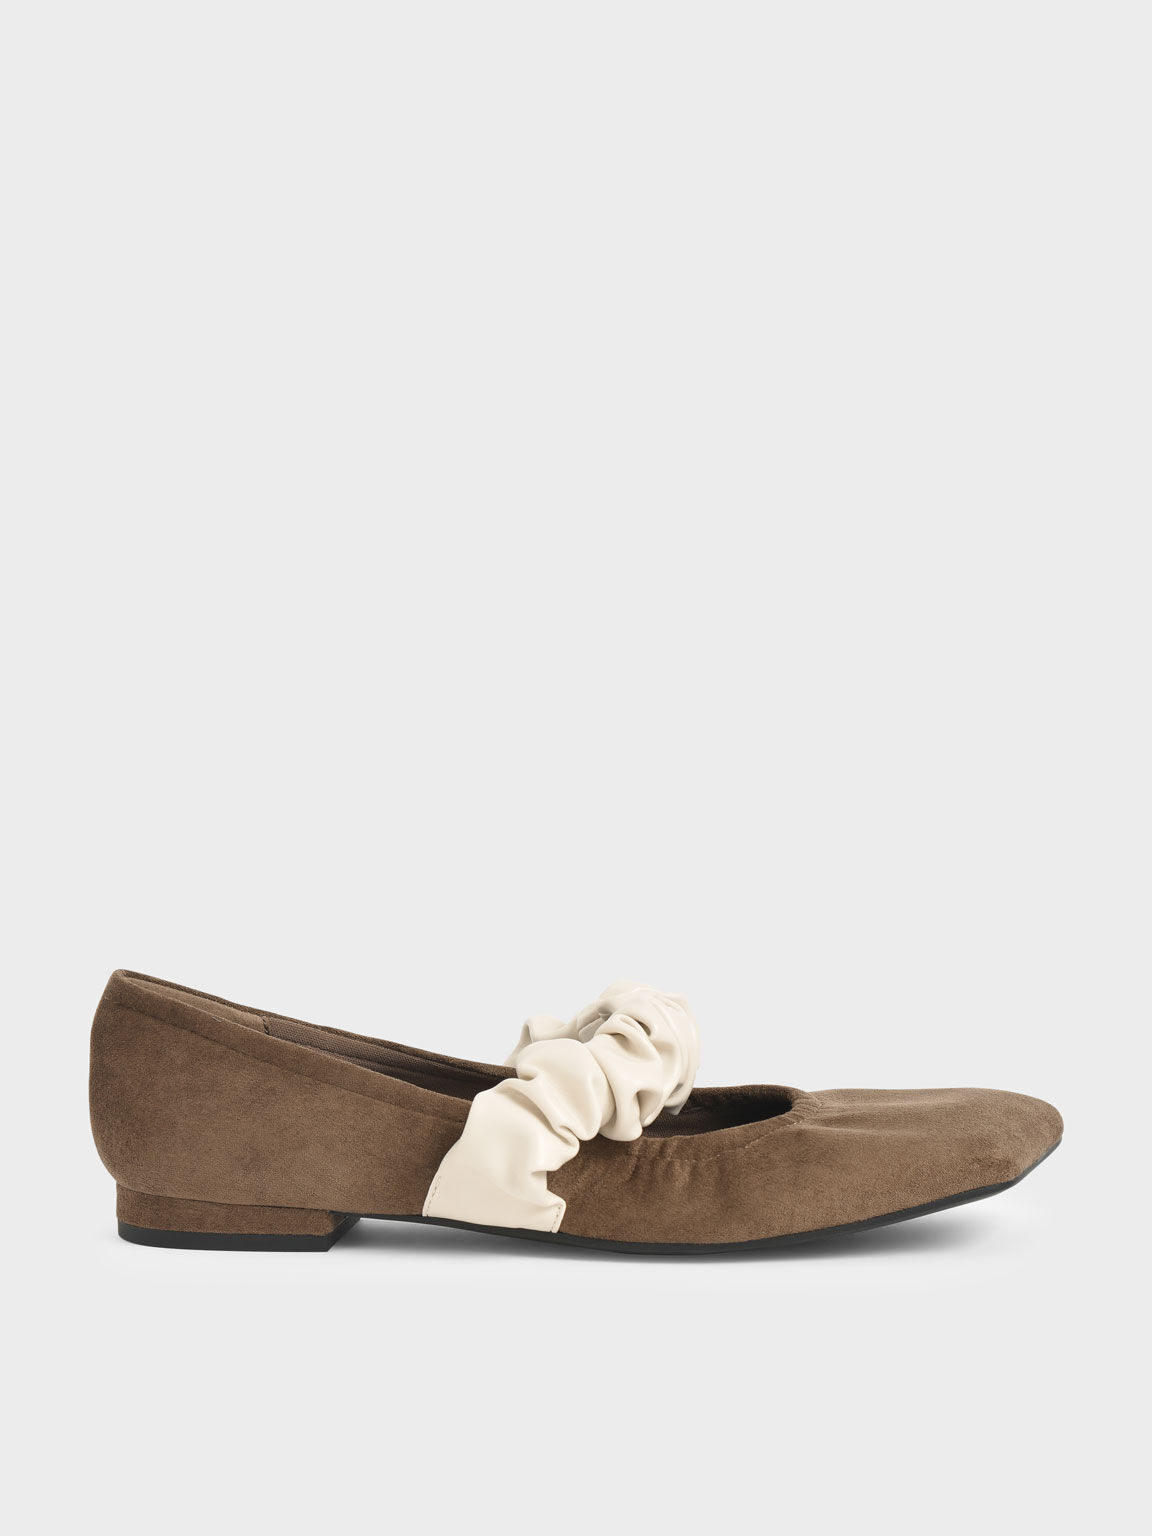 Ruffle Strap Mary Janes, Olive, hi-res